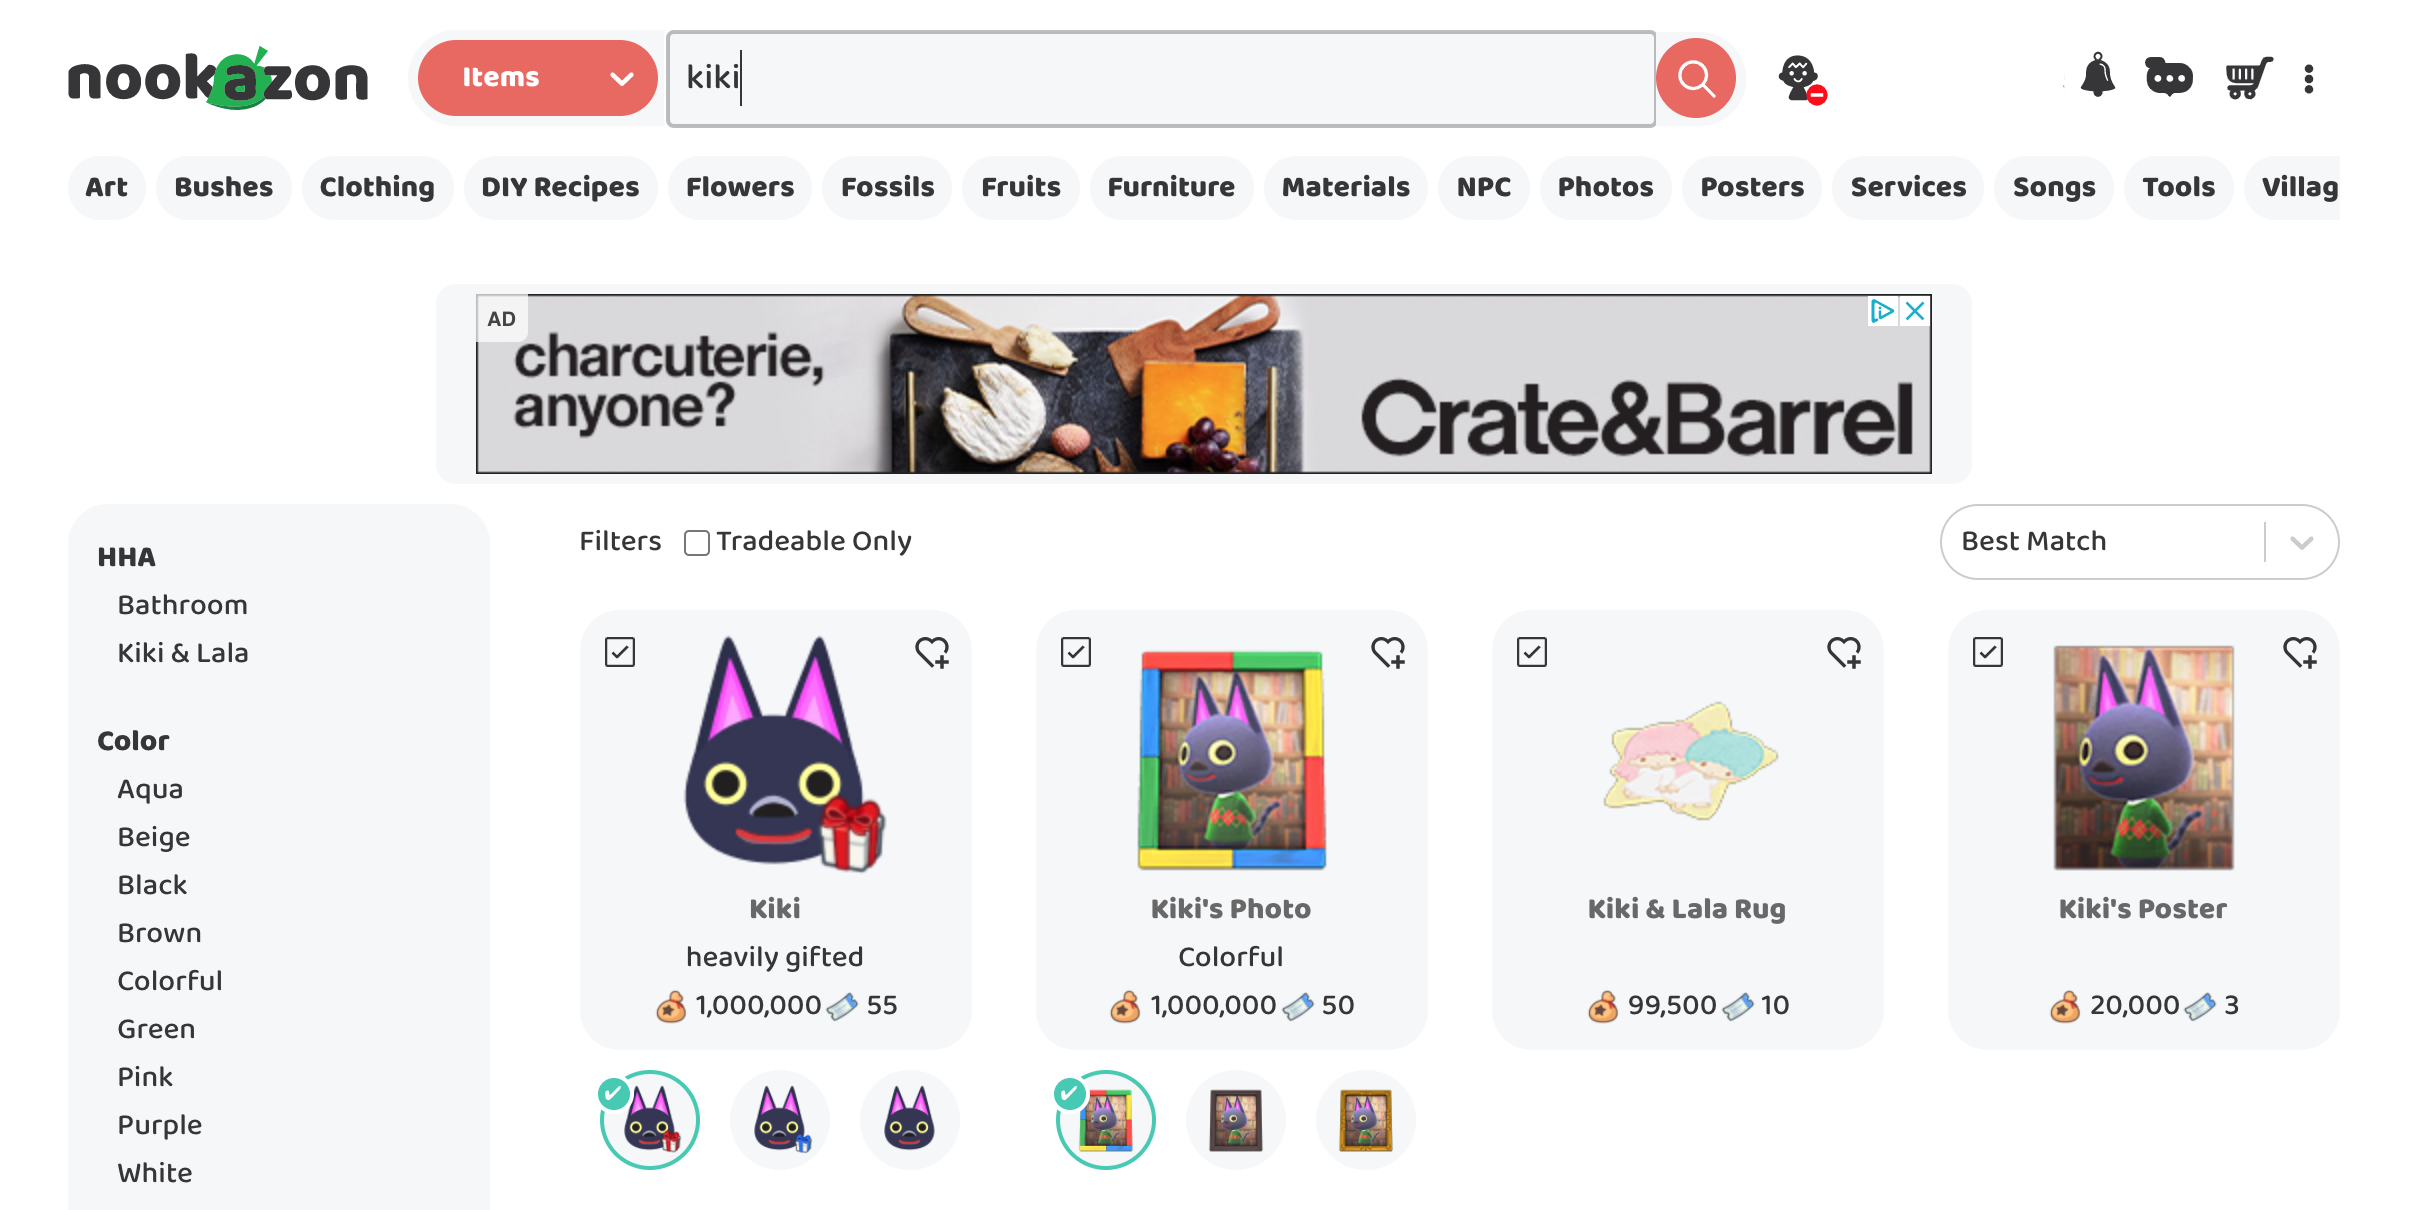 A Nookazon user is on the search page for Kiki, a black cat. She is a normal villager. From left to right, the page shows listing for Kiki (the villager), Kiki's photo, Kiki & Lala Rug, and Kiki's poster 